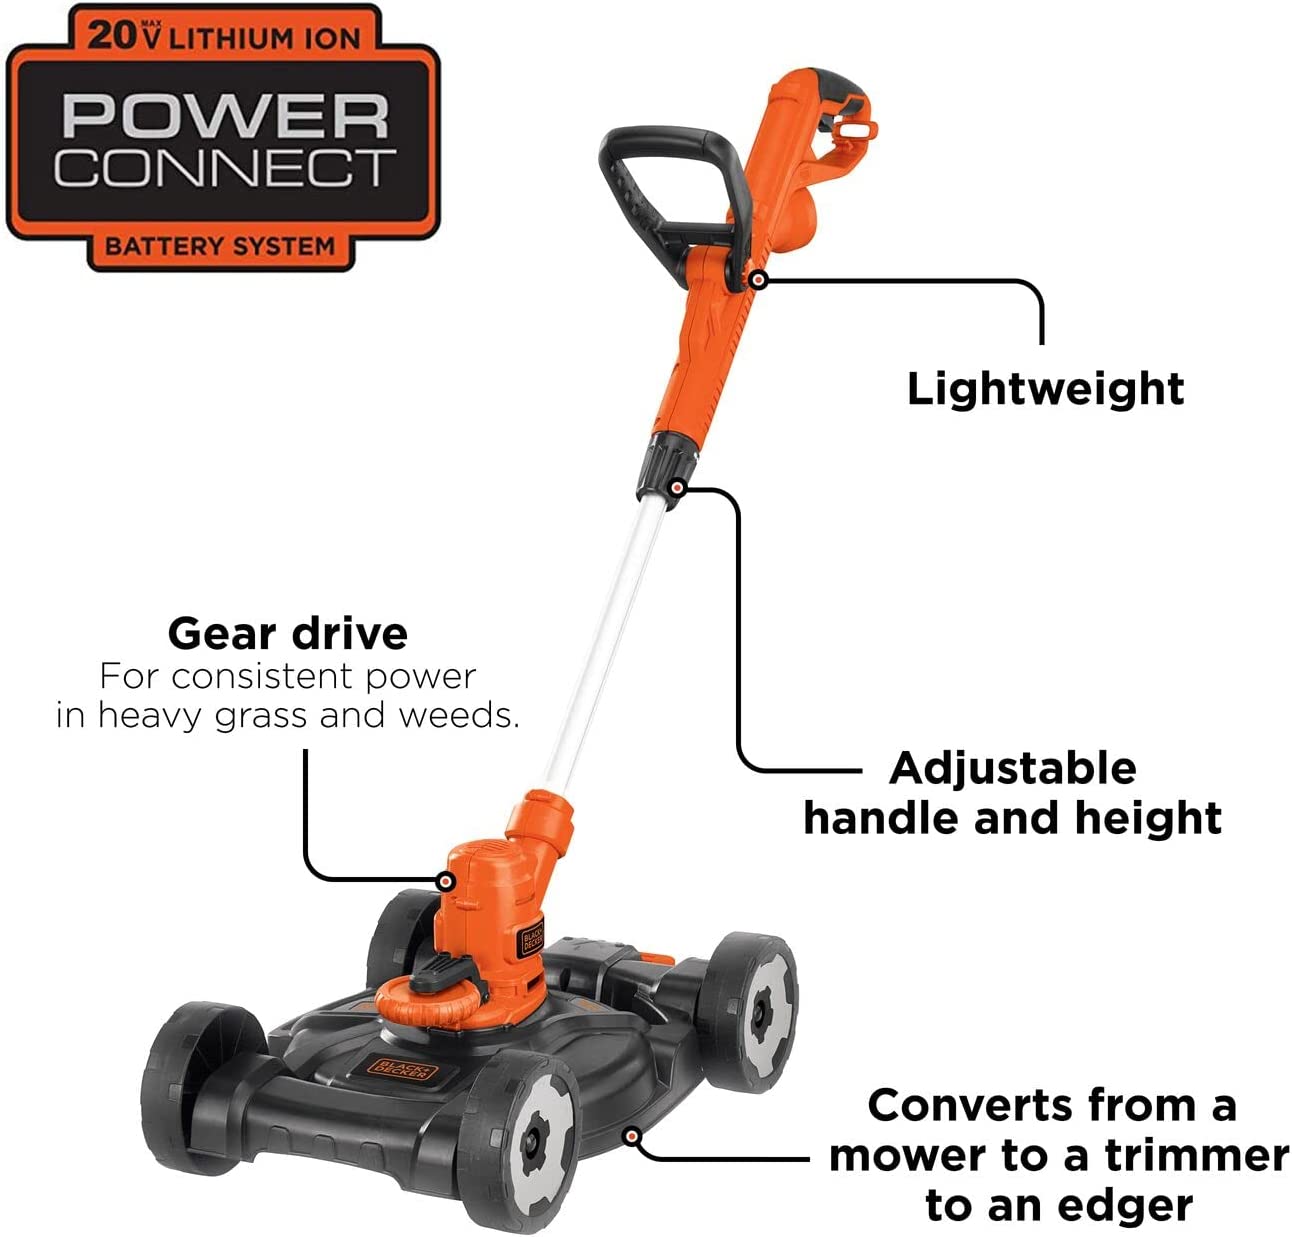 https://bigbigmart.com/wp-content/uploads/2023/06/BLACKDECKER-3-in-1-String-Trimmer-Edger-Lawn-Mower-6.5-Amp-12-Inch-Corded-MTE912-Power-cord-not-included-Black-Red1.jpg